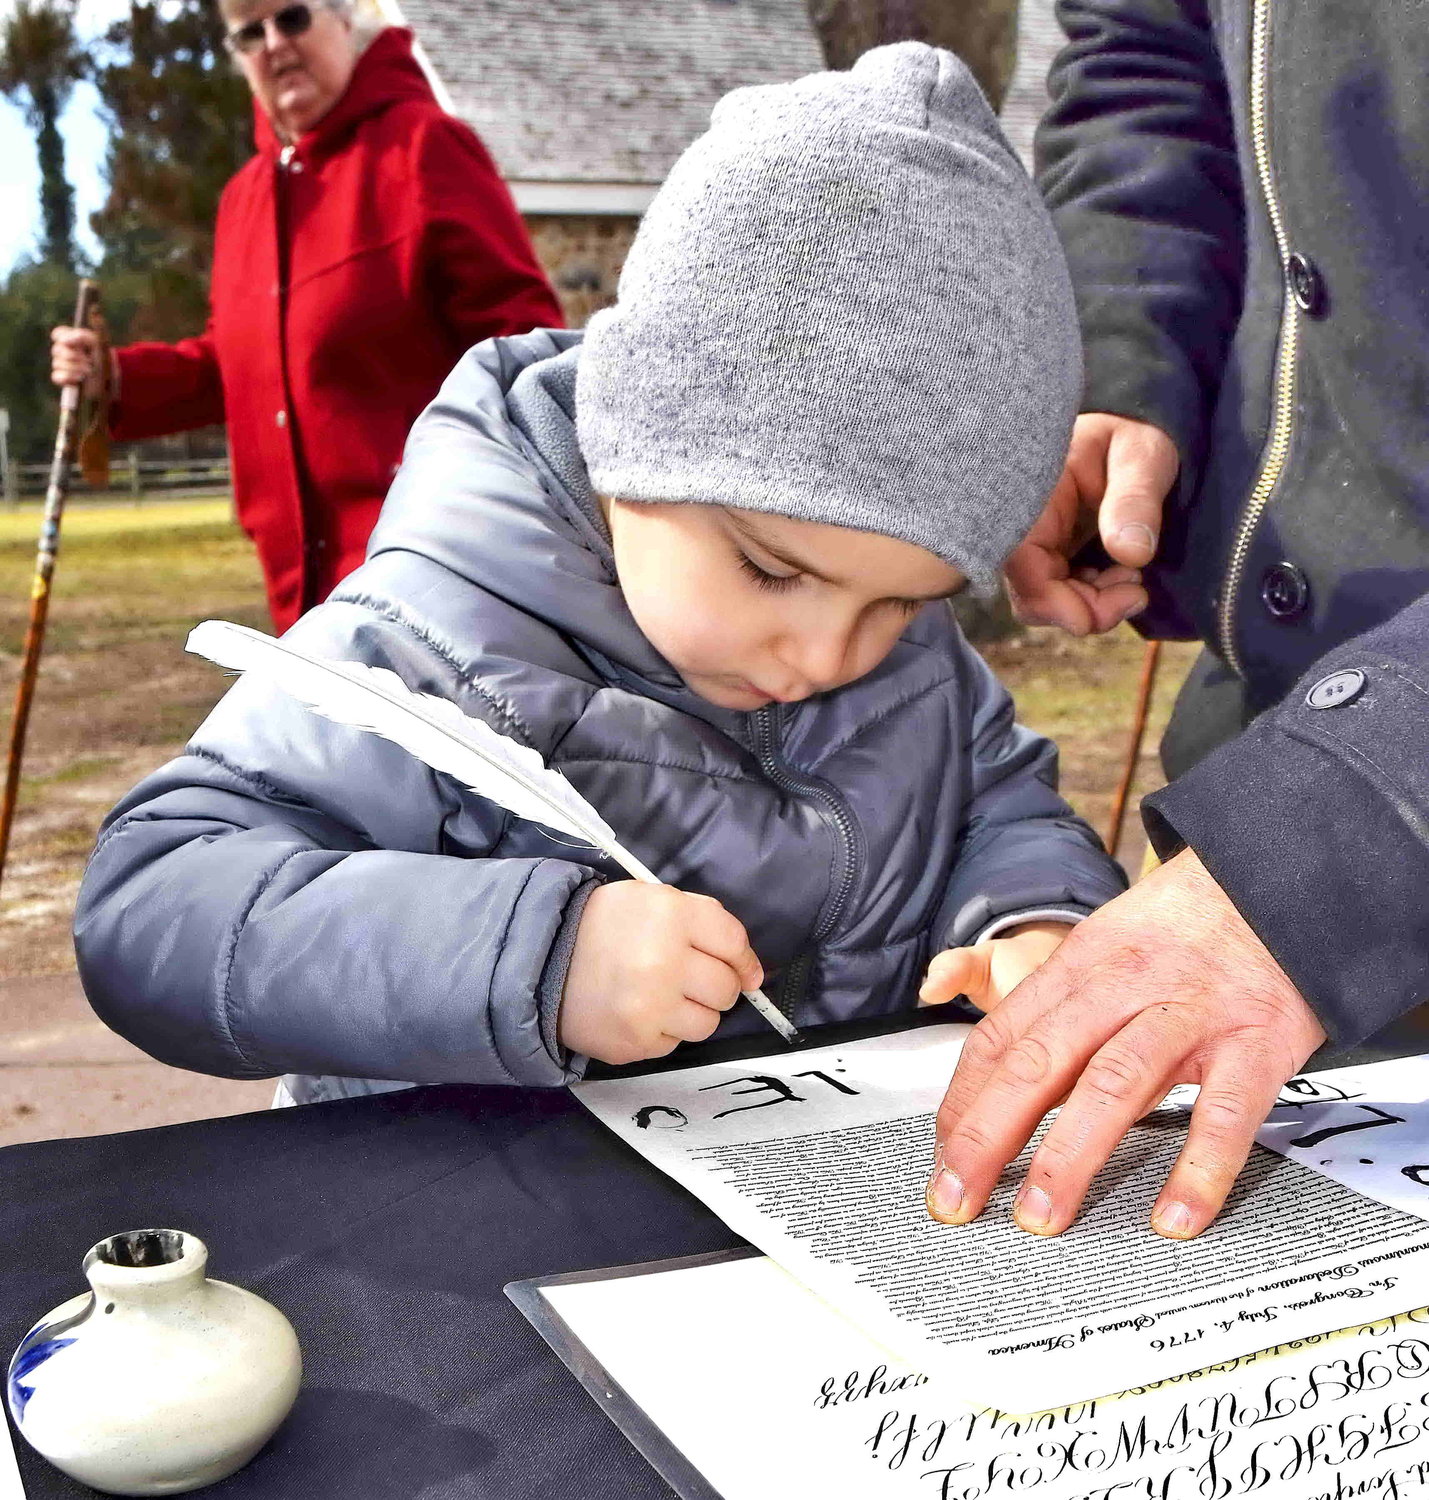 A youngster tries writing with a quill pen.